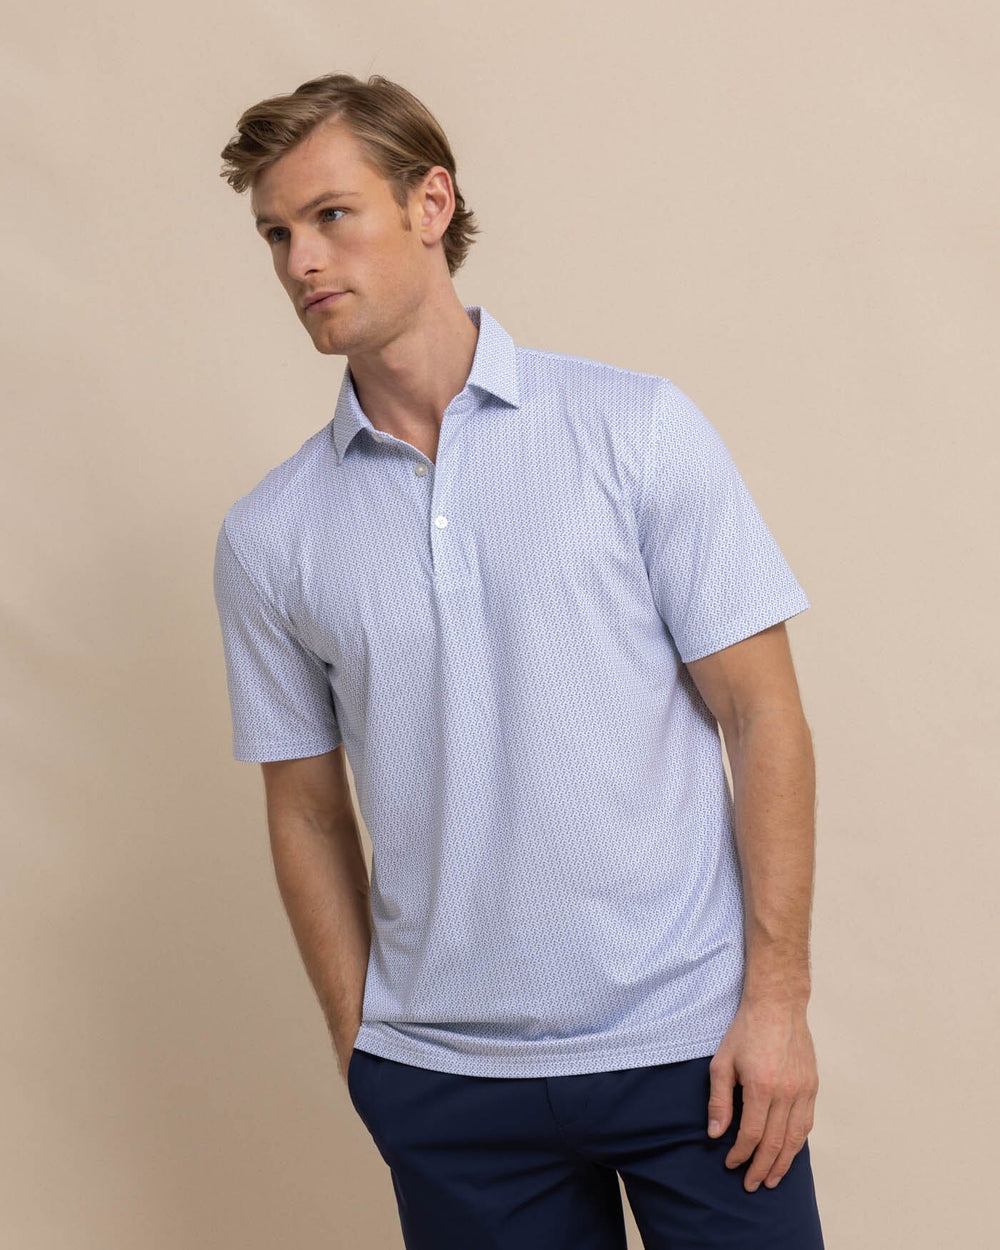 The front view of the Southern Tide Driver Clubbin It Printed Polo by Southern Tide - Classic White